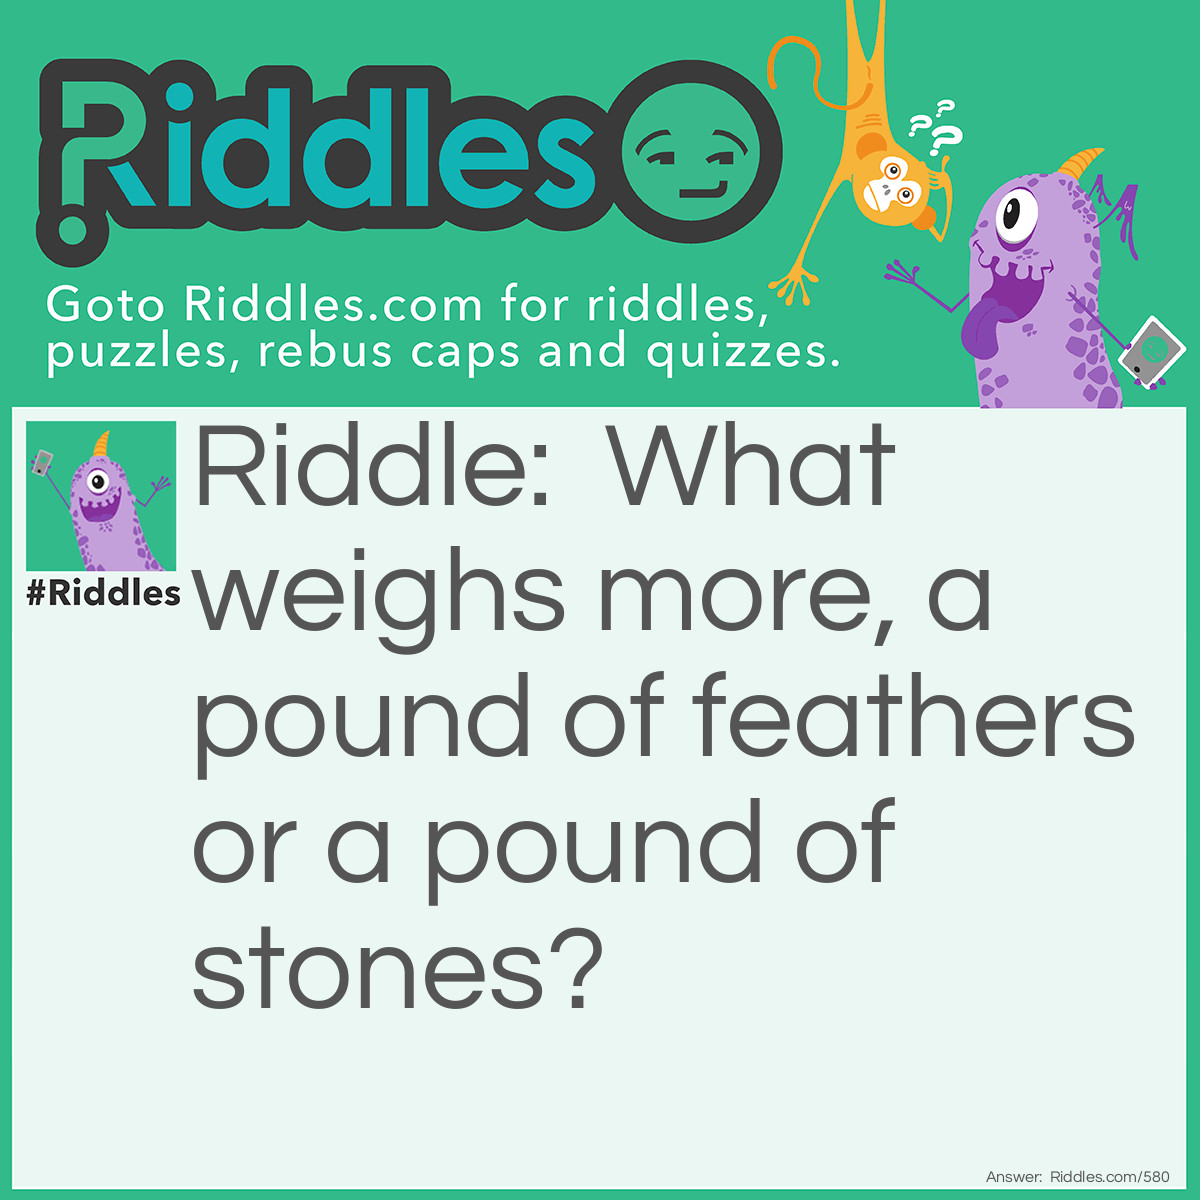 Riddle: What weighs more? A pound of feathers or a pound of stones? Answer: The same. They both weigh a pound!